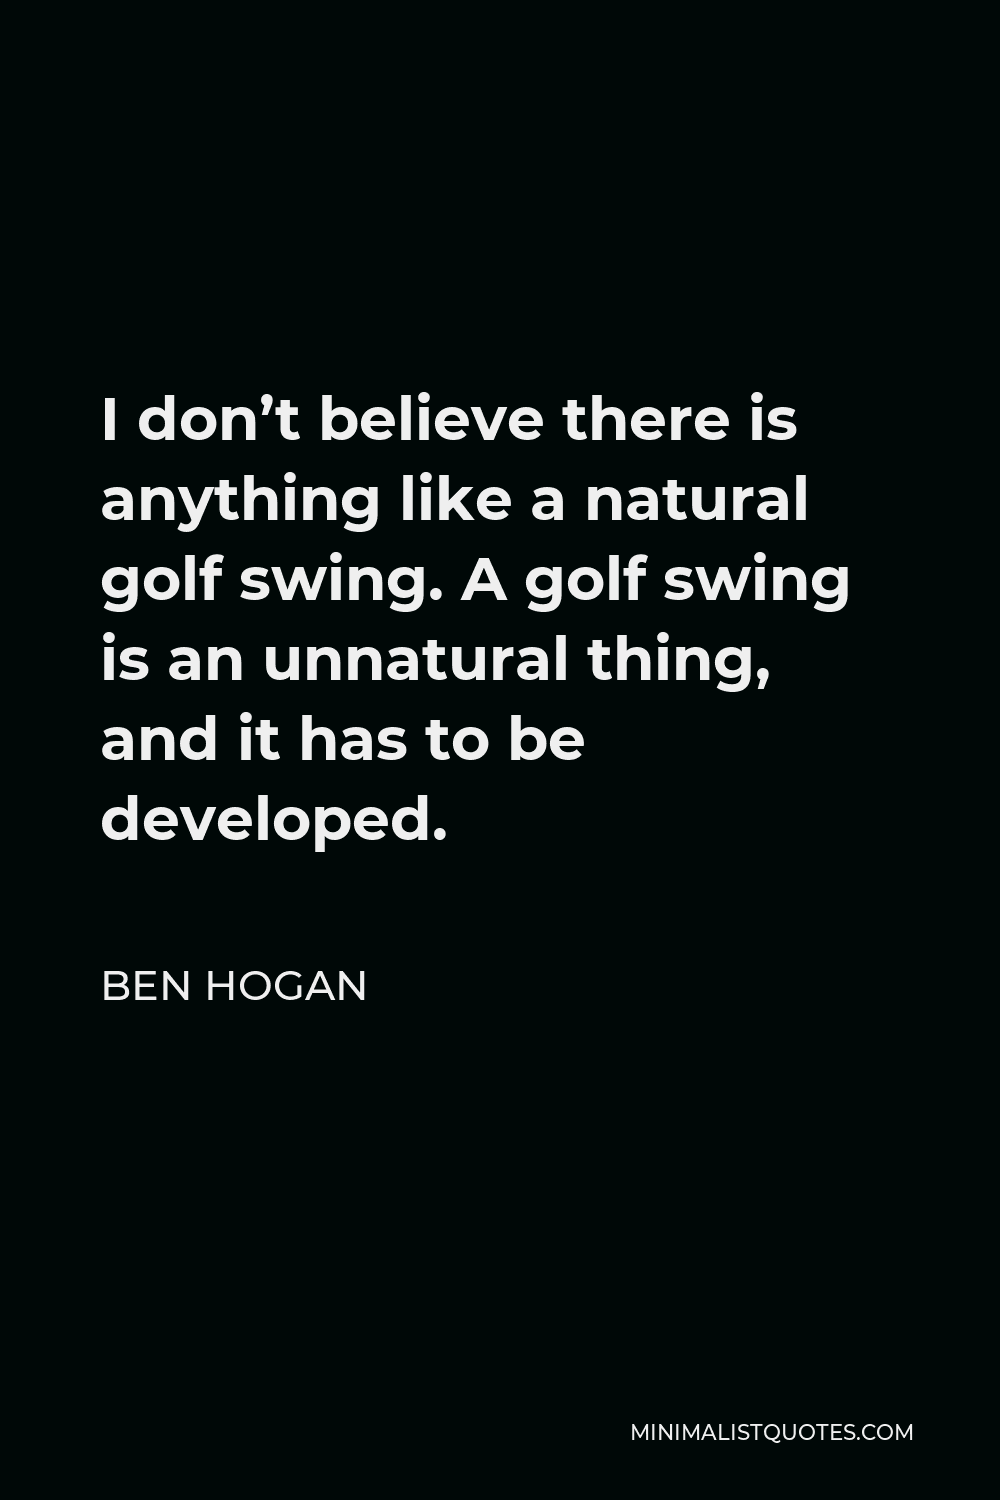 Ben Hogan Quote - I don’t believe there is anything like a natural golf swing. A golf swing is an unnatural thing, and it has to be developed.